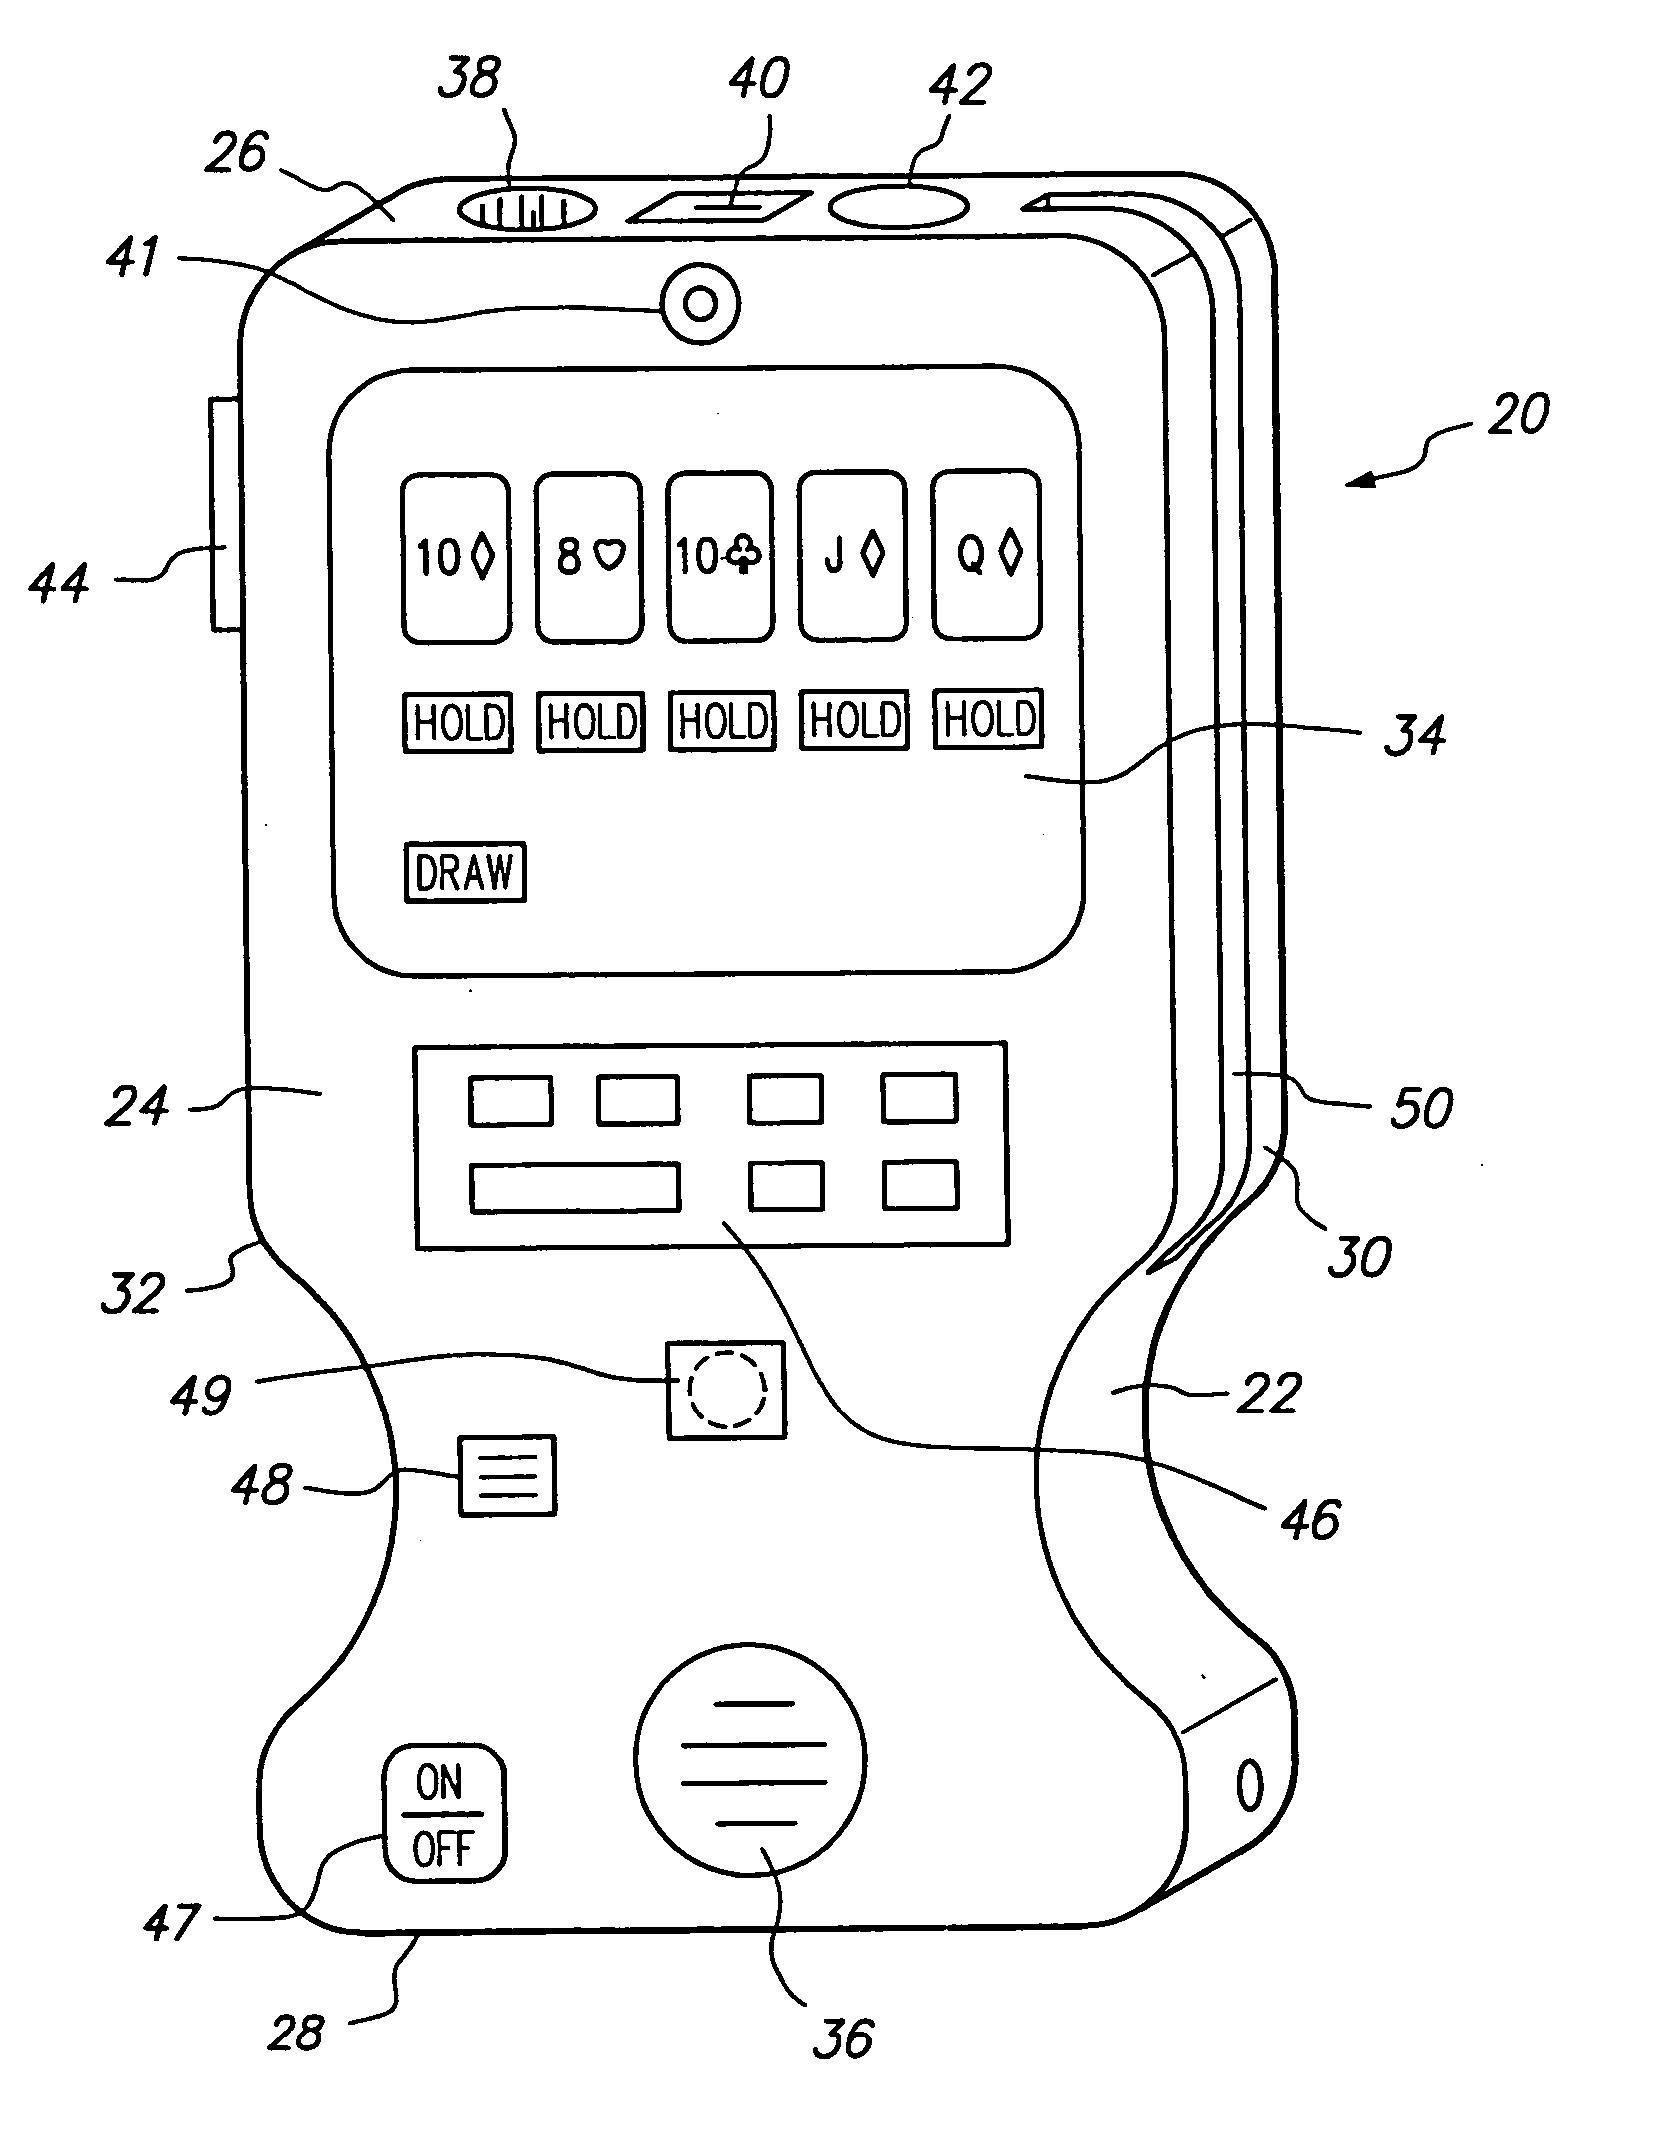 Personal gaming device and method of presenting a game